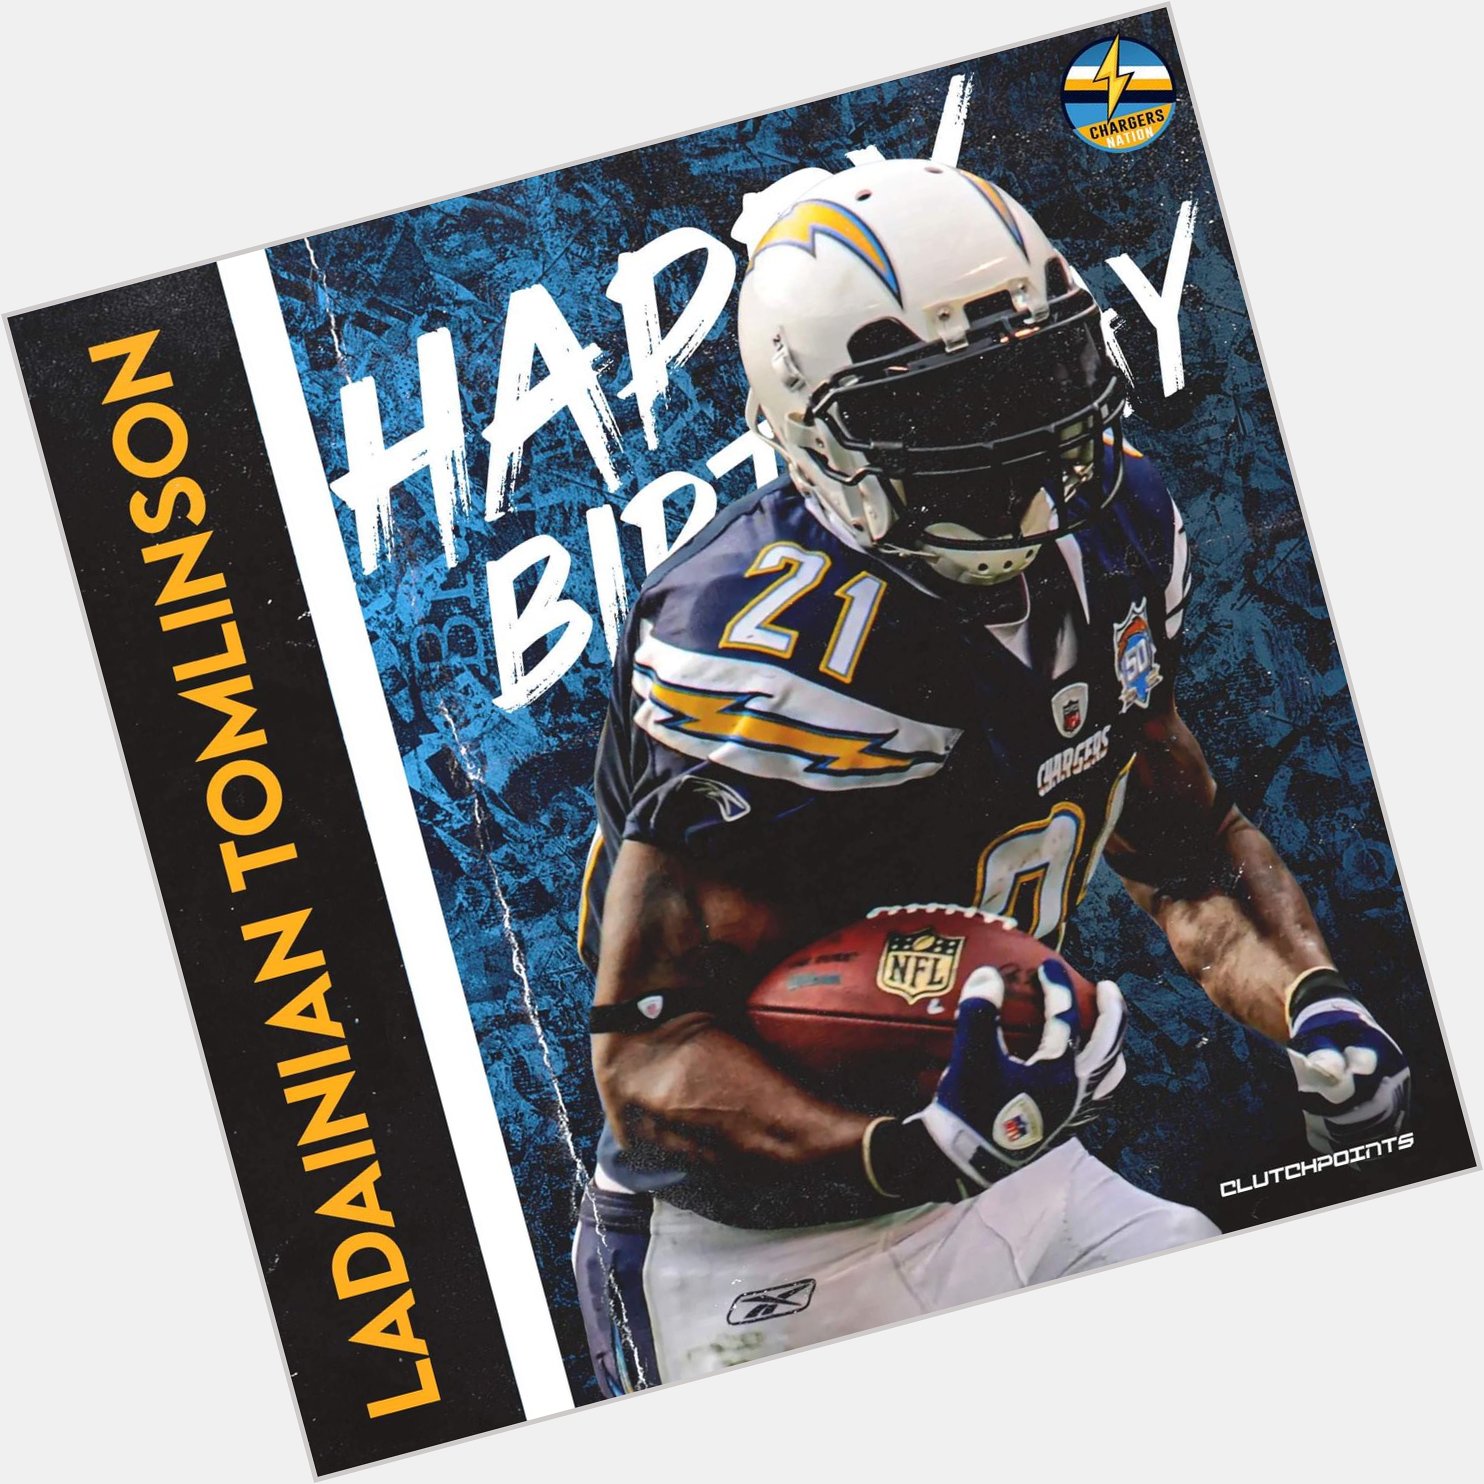 Let\s all wish 5x Pro Bowler and Hall of Famer LaDainian Tomlinson a happy 42nd birthday! 